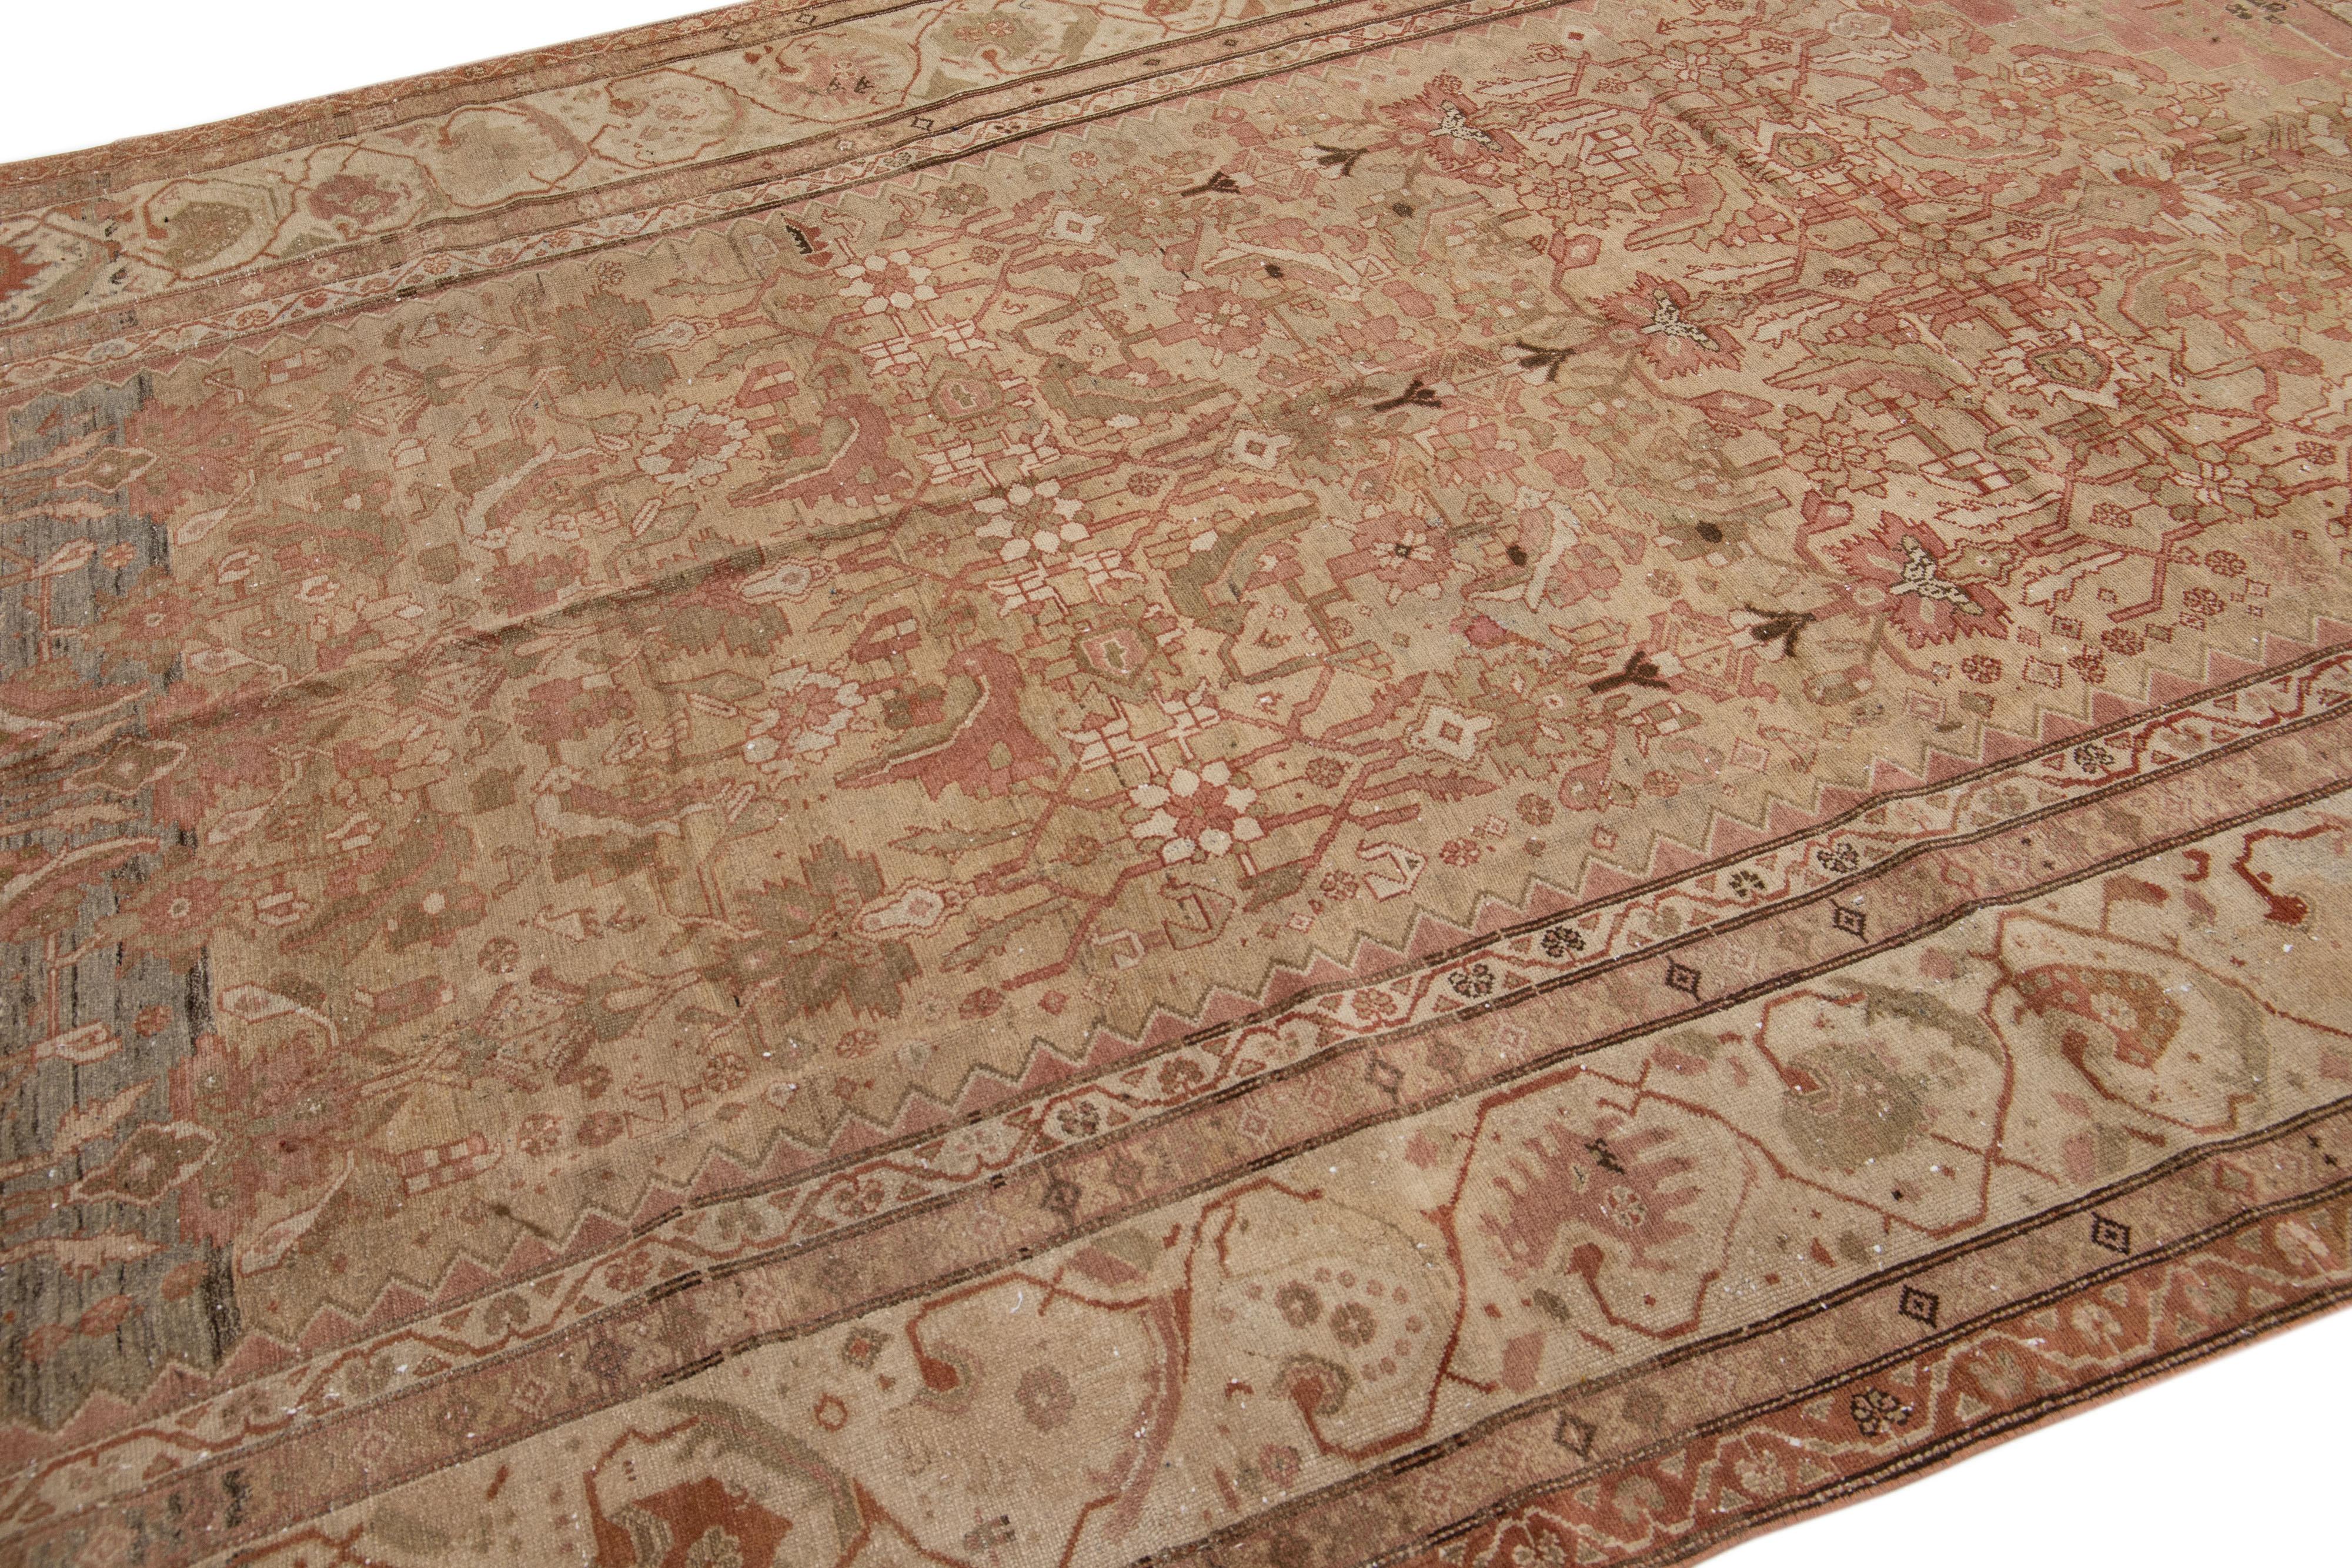  Handmade Floral Antique Persian Malayer Wool Rug in Tan In Good Condition For Sale In Norwalk, CT